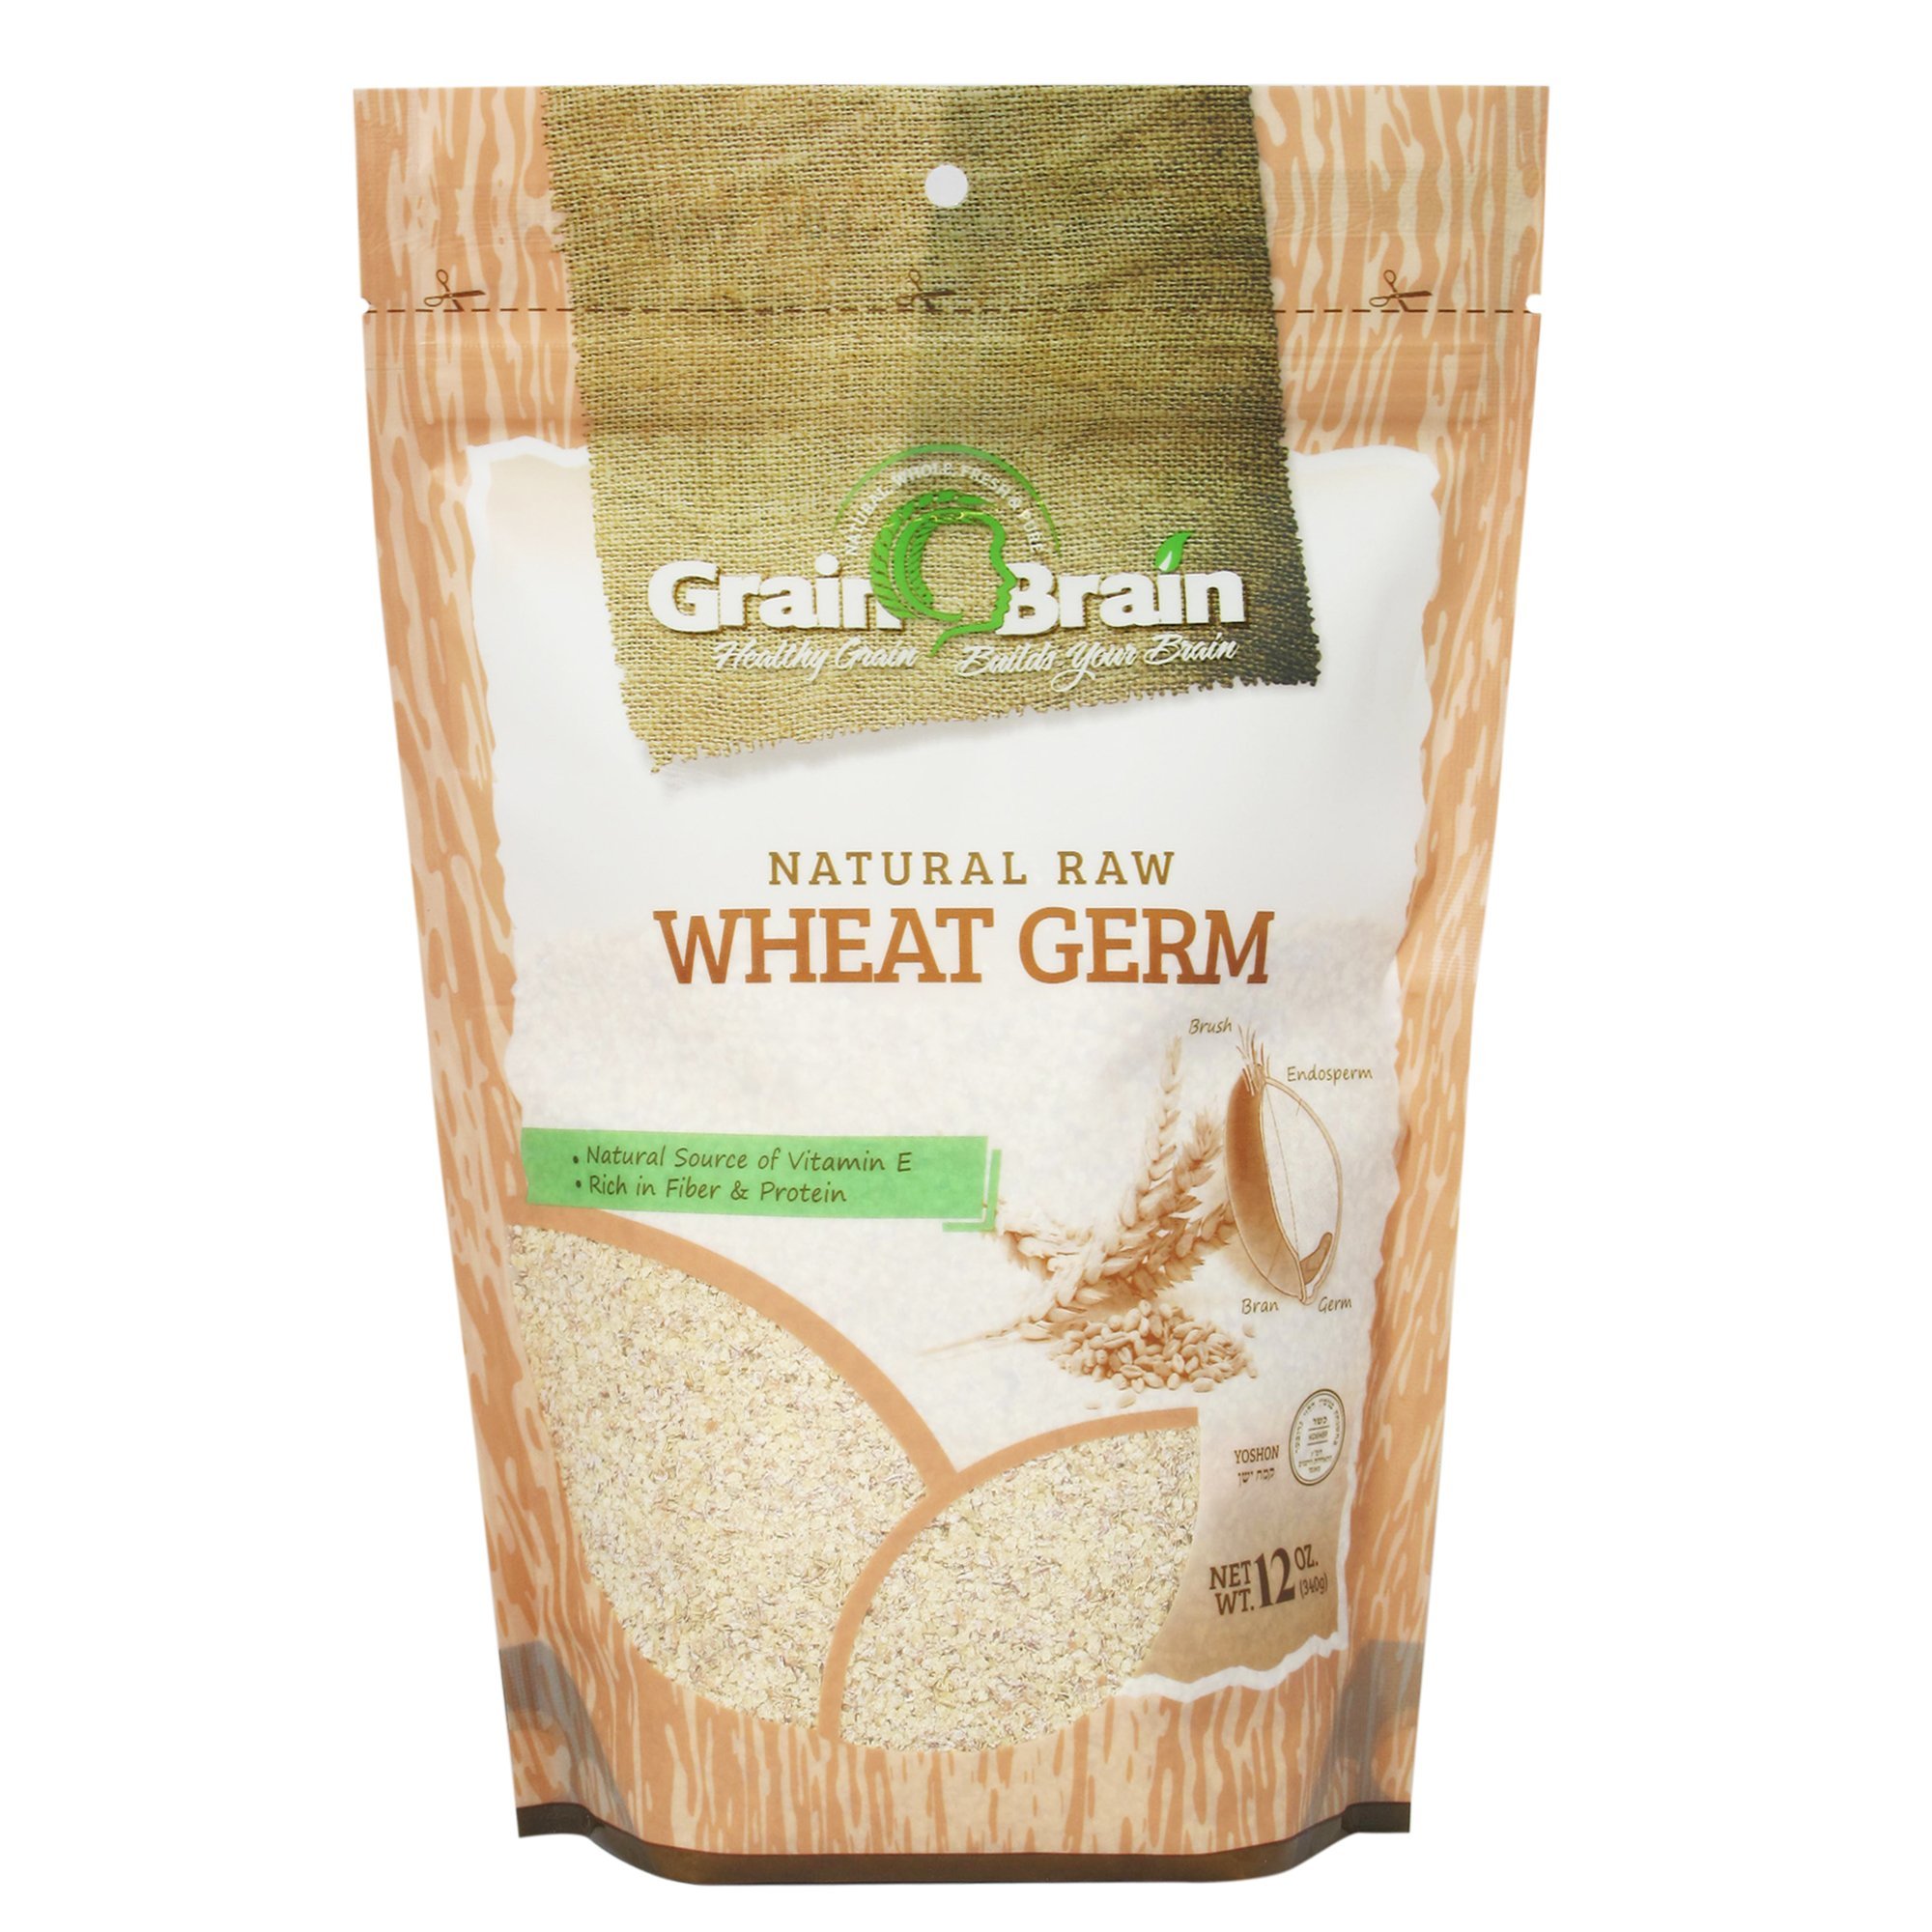 Book Cover Grain Brain Wheat Germ 12 oz (12 oz) Raw, All natural, Untoasted. Packaged in Resealable Pouch bags for easy use